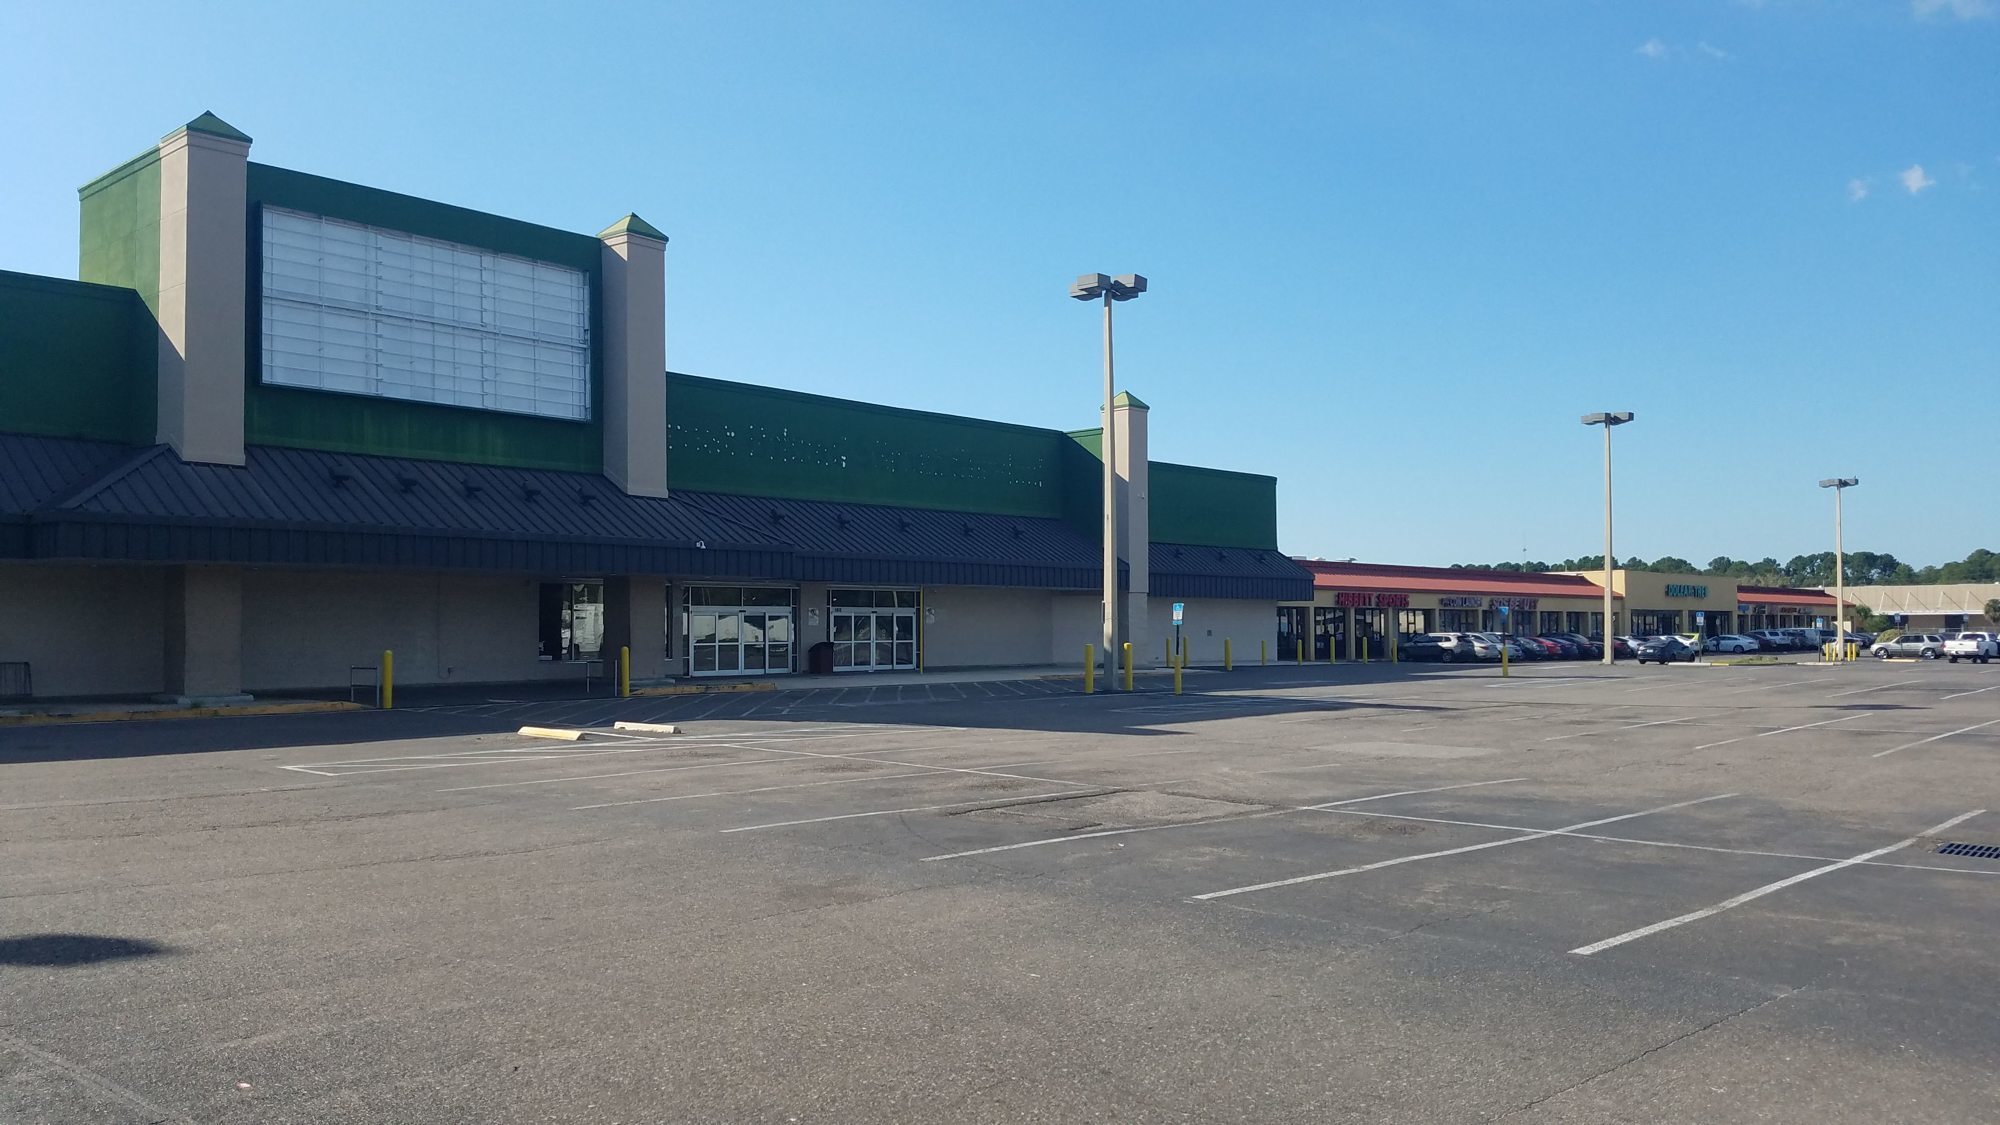 Williams & Rowe will renovate the former Harveys Supermarket at 1012 Edgewood Ave. N. in Commonwealth Shopping Center